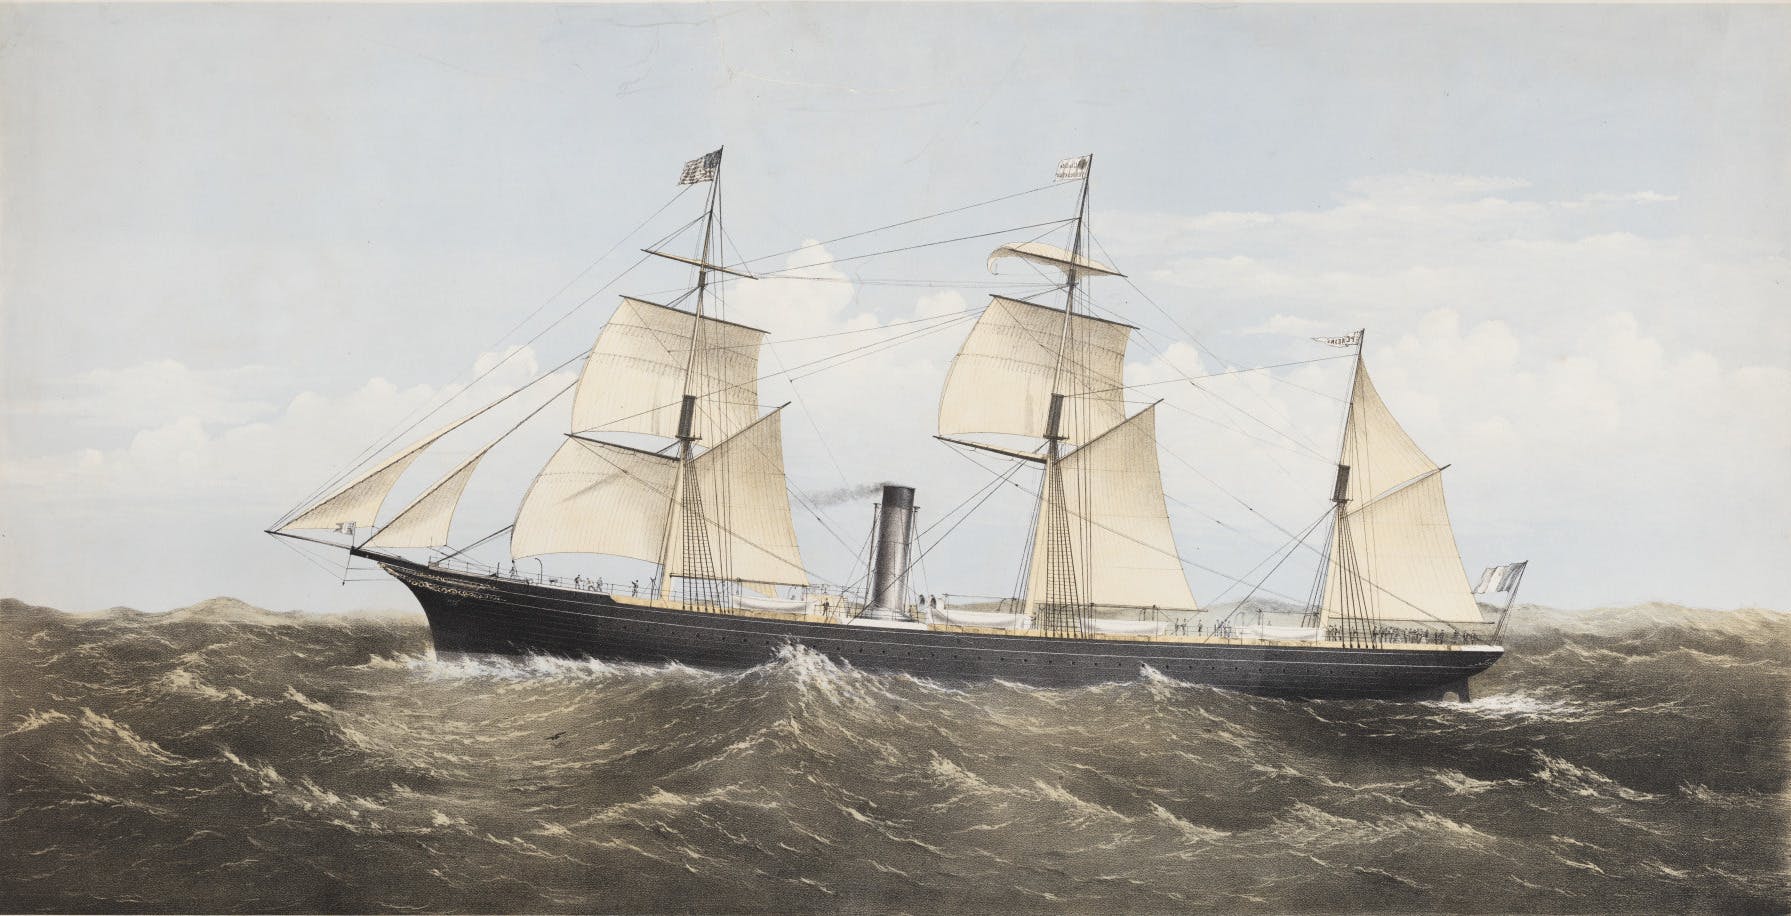 Portrait of the Compagnie Generale Transatlantique's (also known as The French Line) steam ship Pereire.